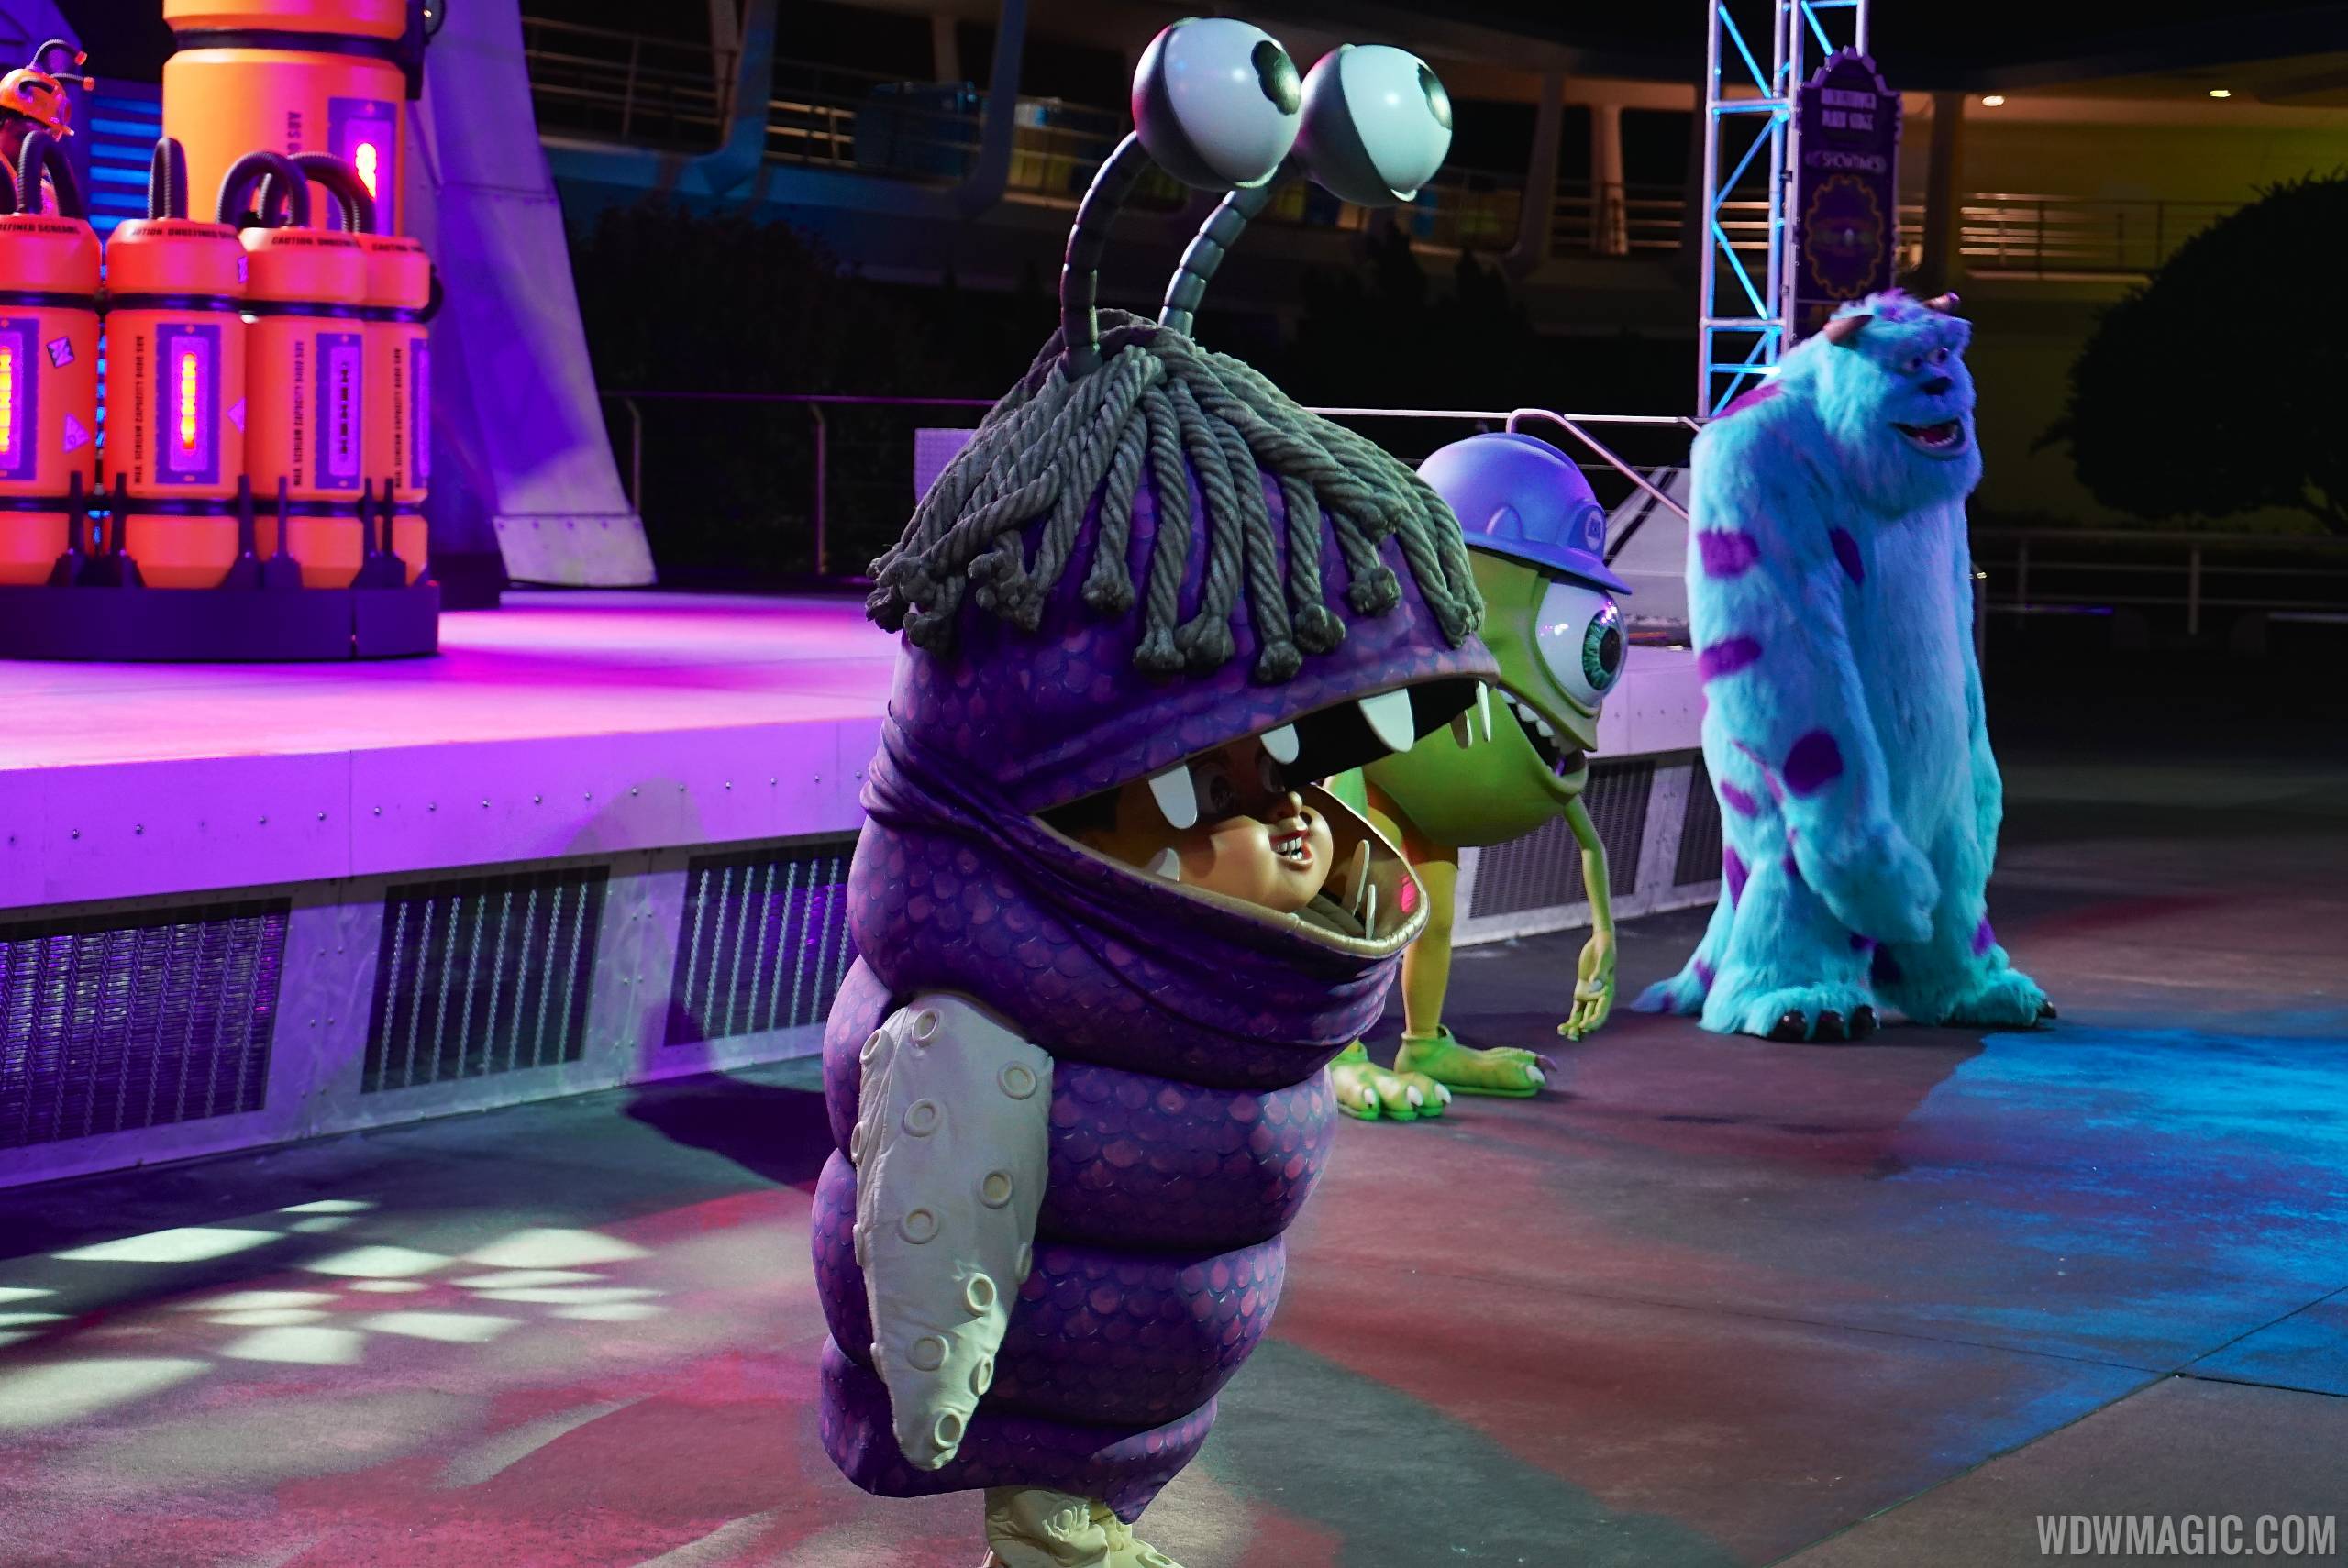 Monsters Inc Dance Party at Mickey's Not So Scary Halloween Party